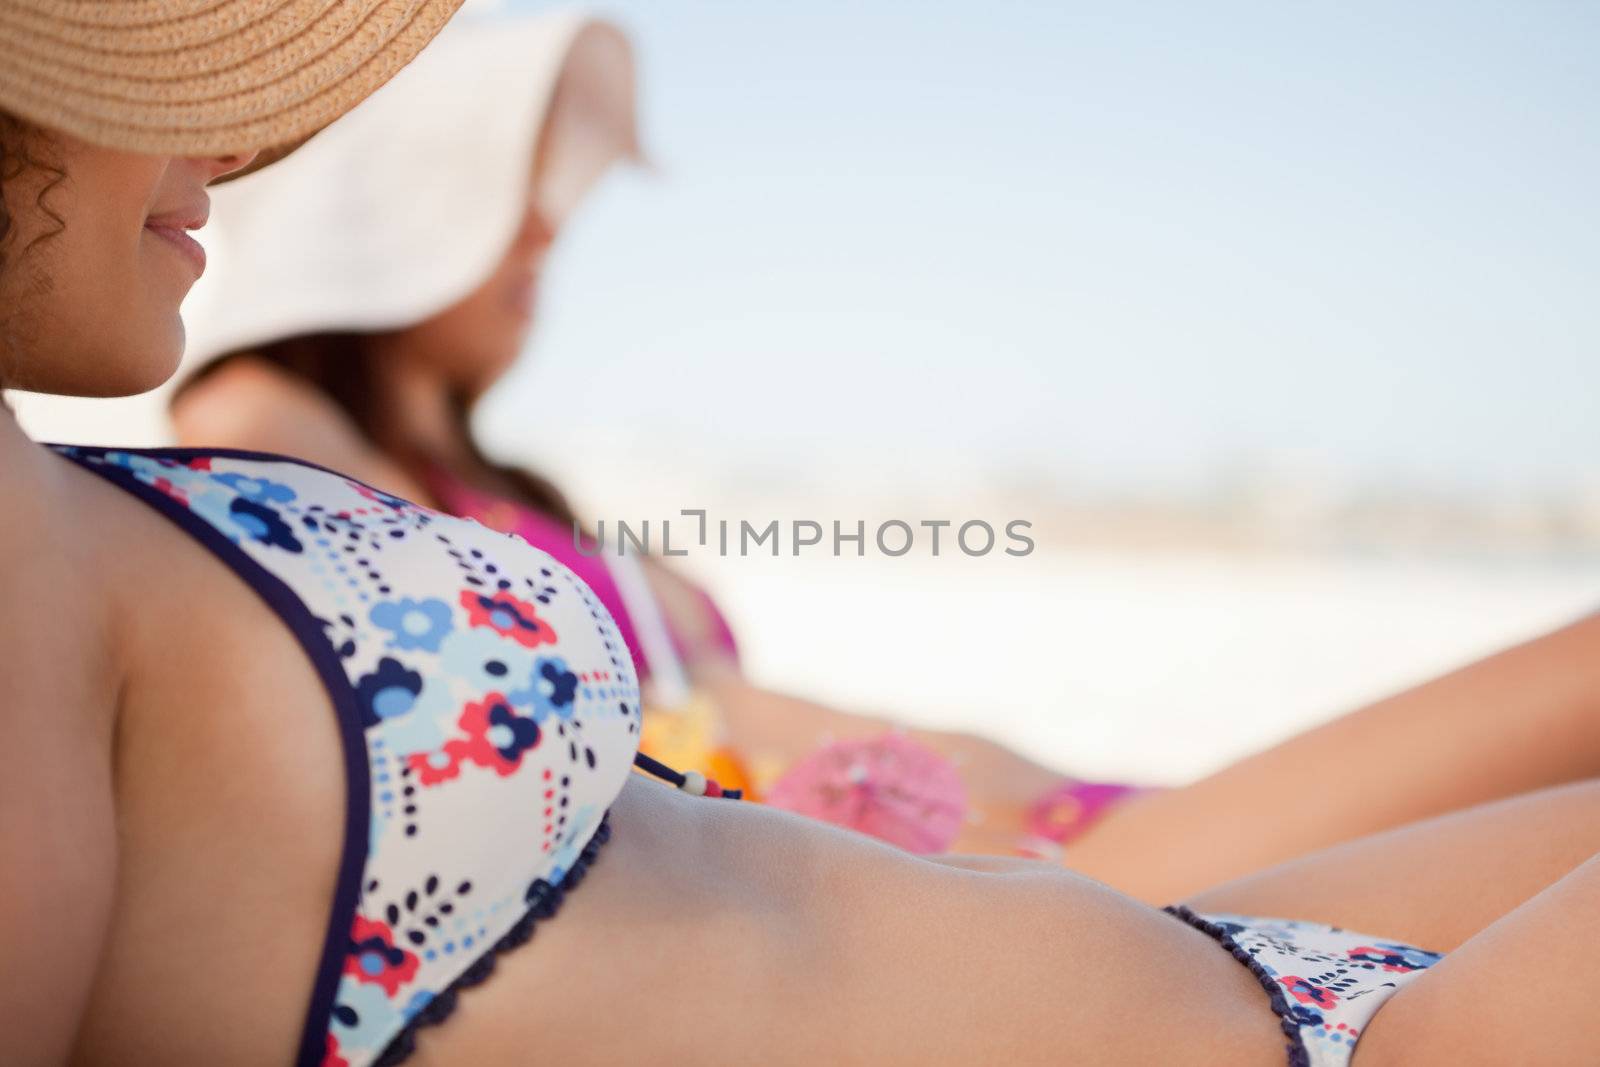 Attractive young woman in bikini lying on the beach with her friend beside her